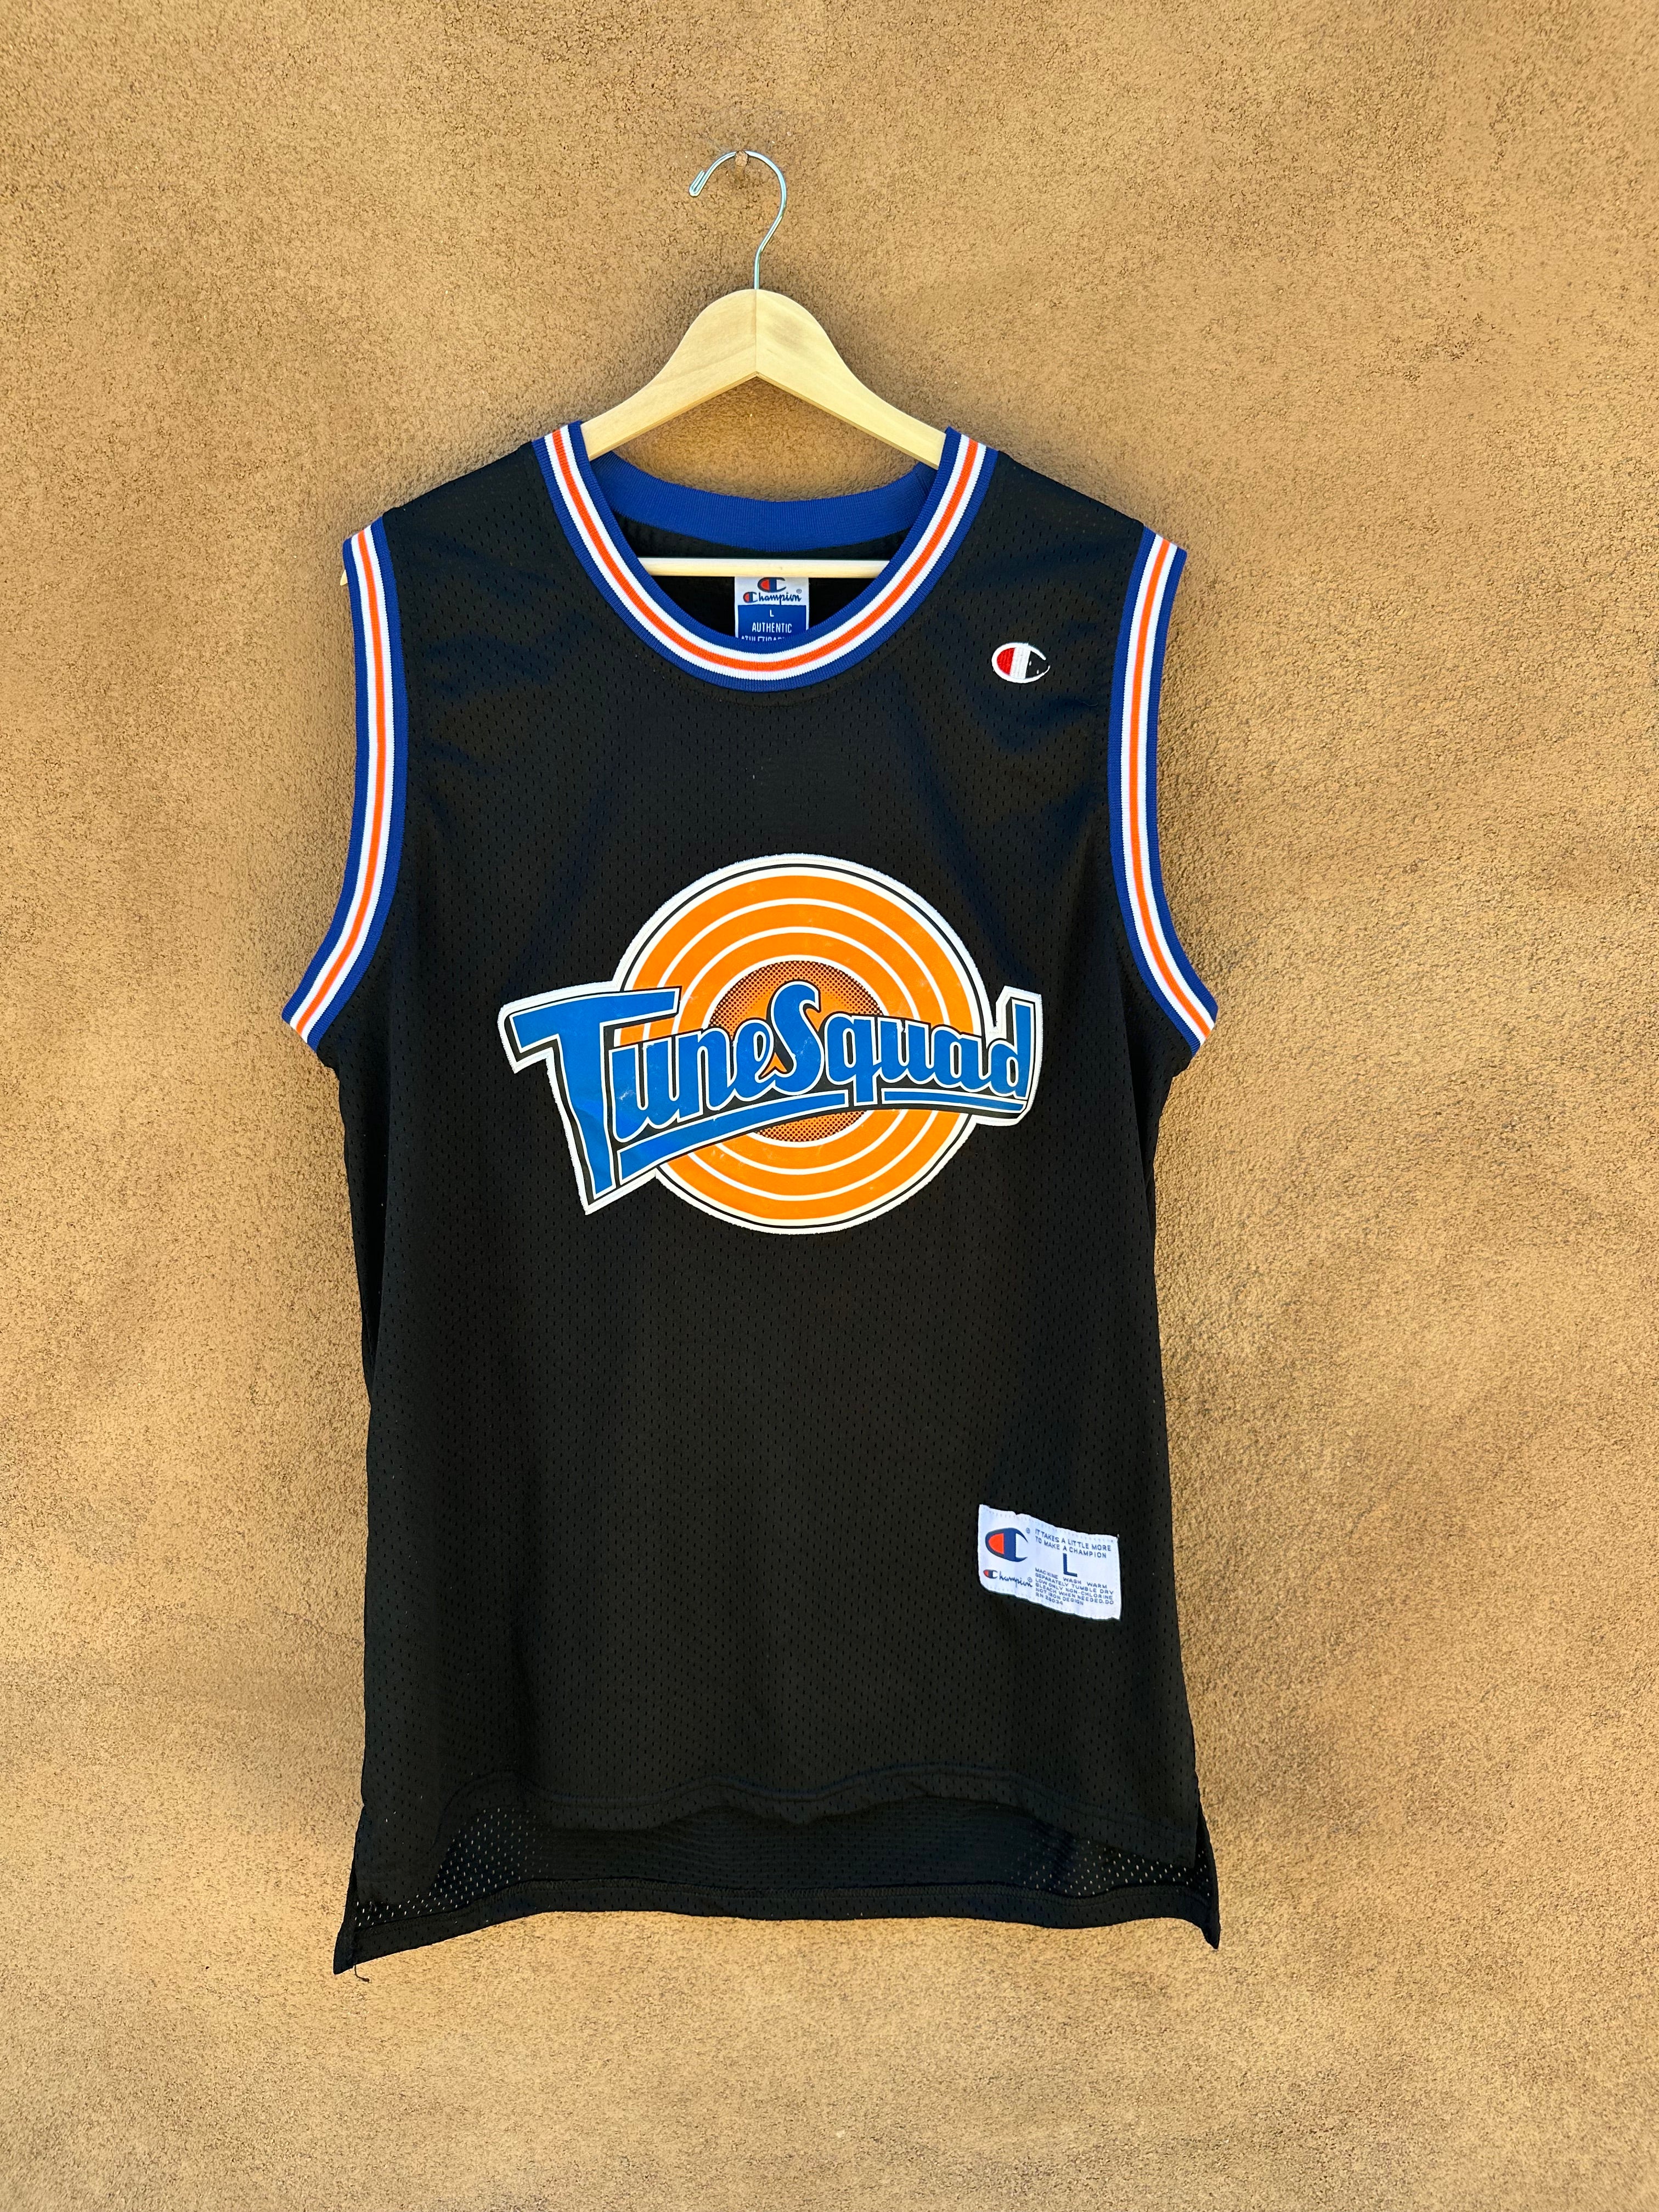 Just Added to the Store: Vintage Champion NBA Jerseys